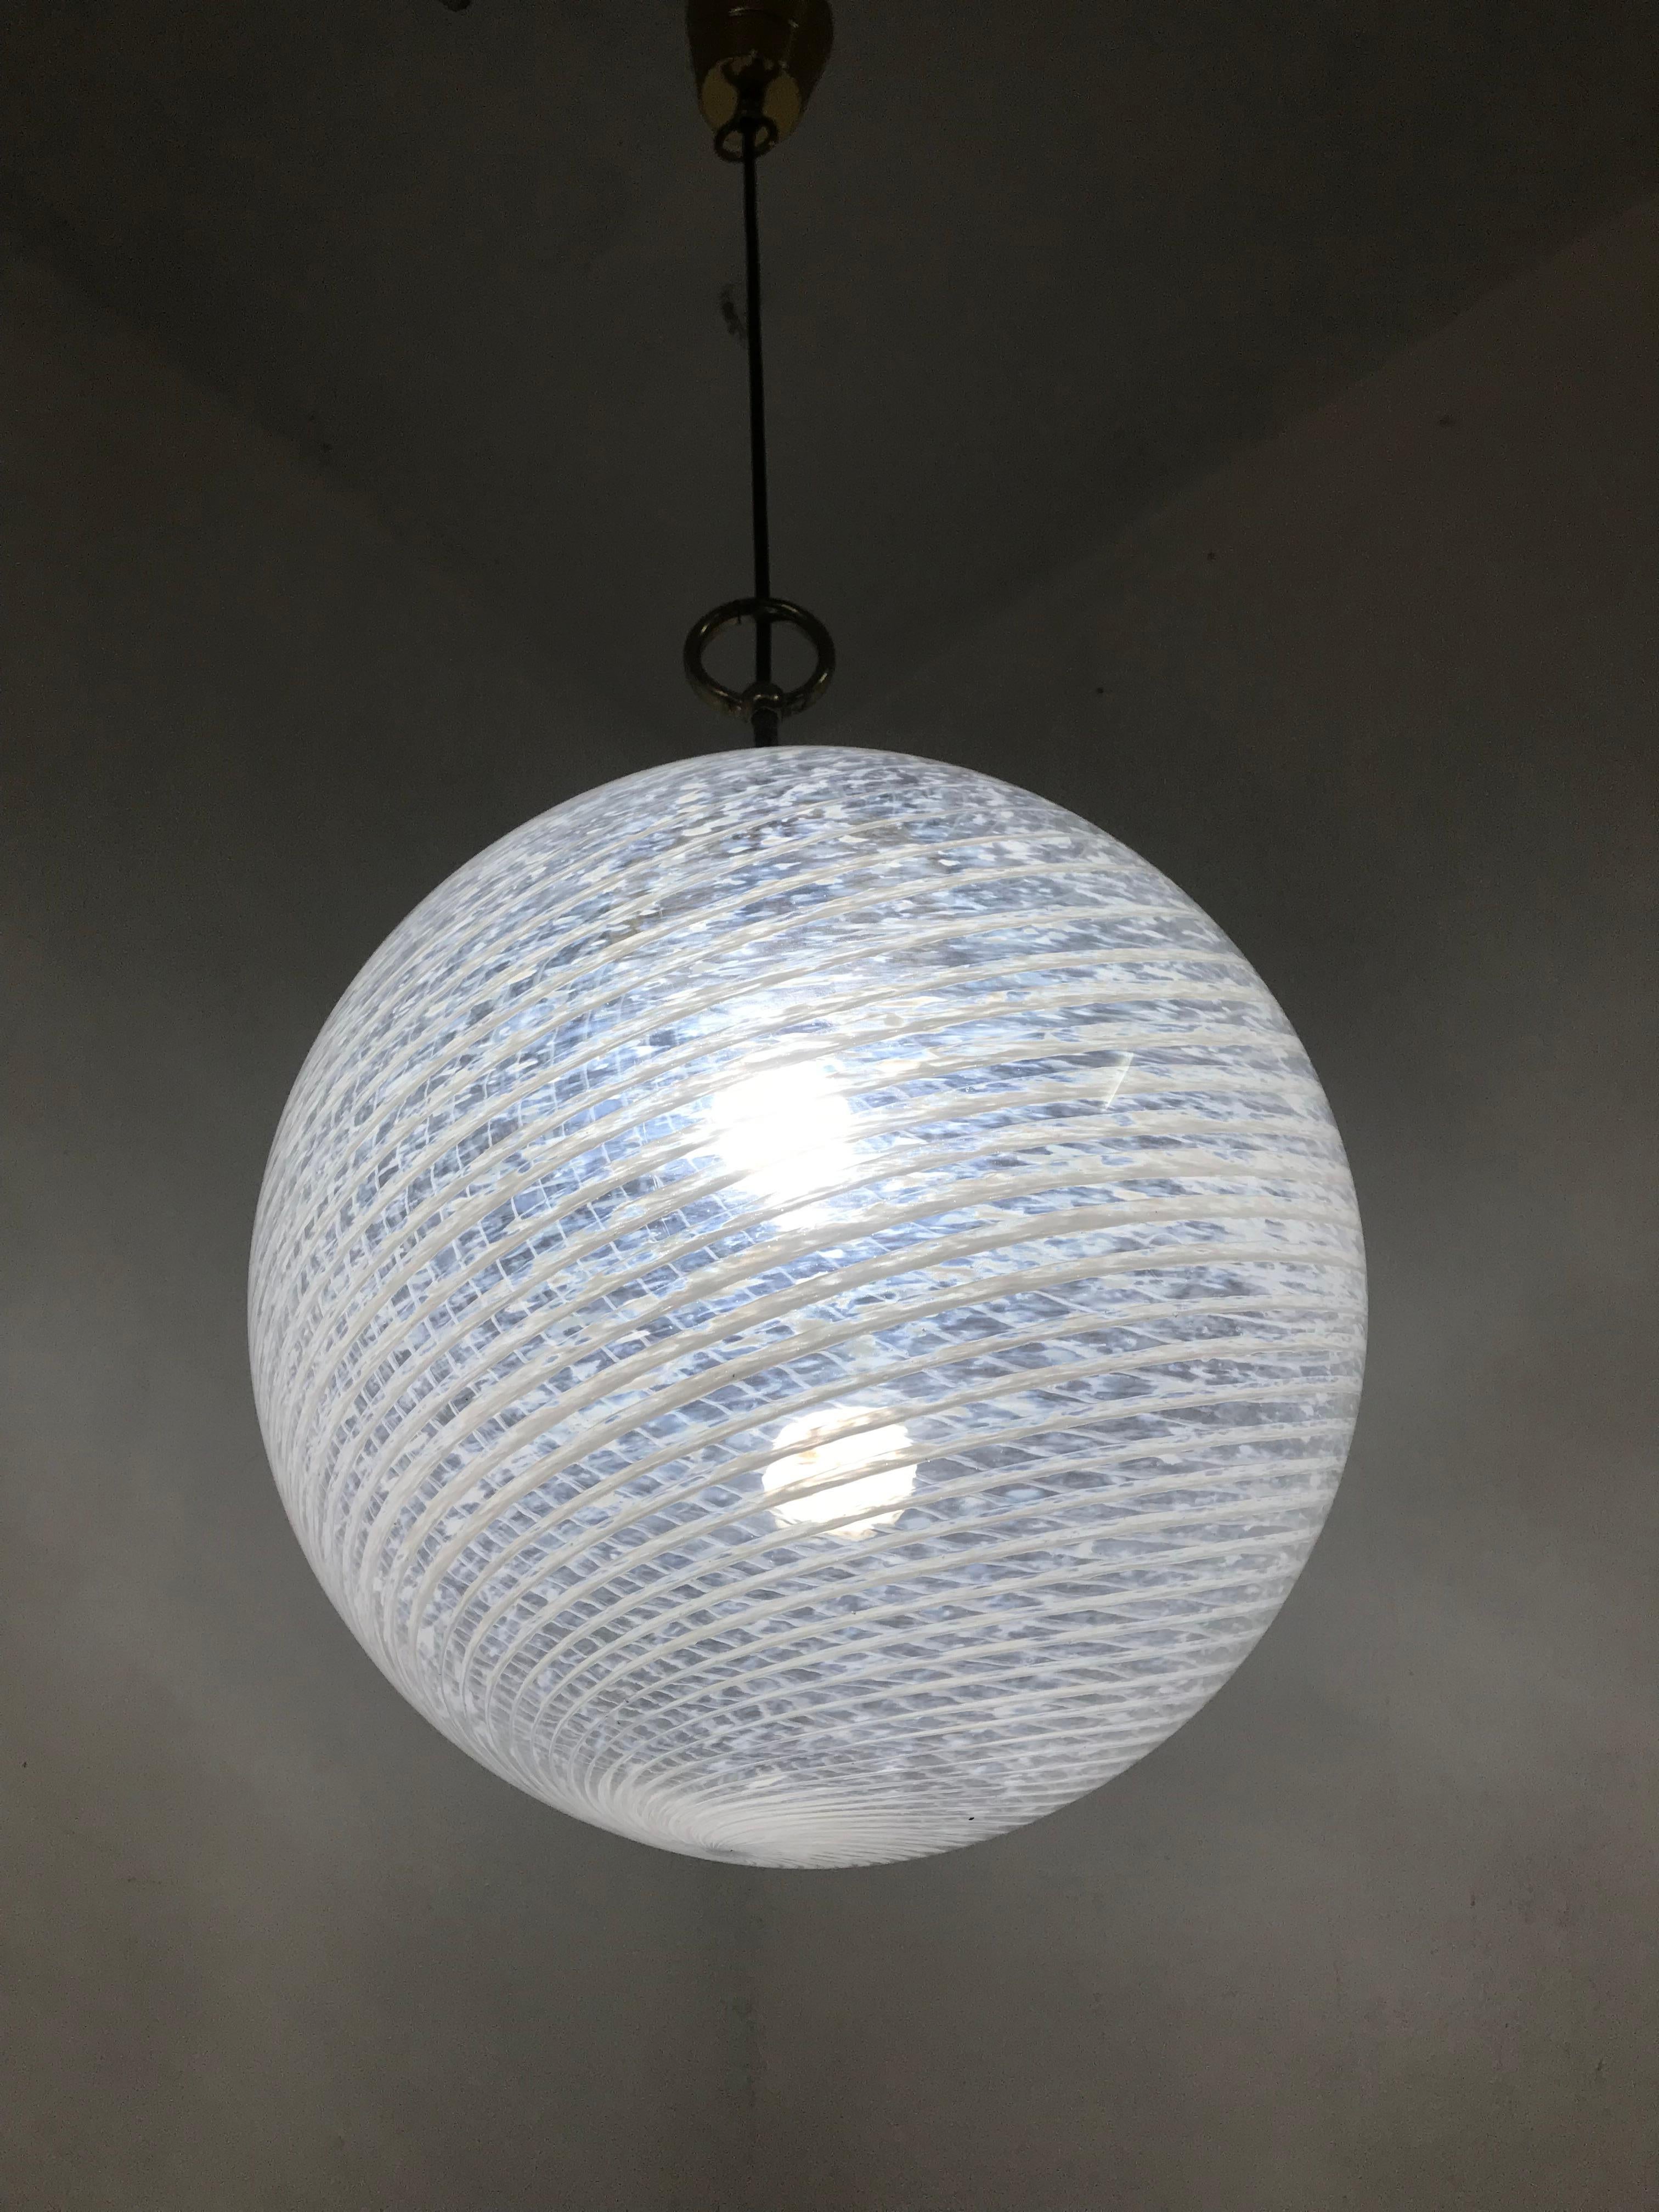 Hand-Crafted Mid-Century Modern Light by Venini in striped and marbled Murano Glass, 1970s